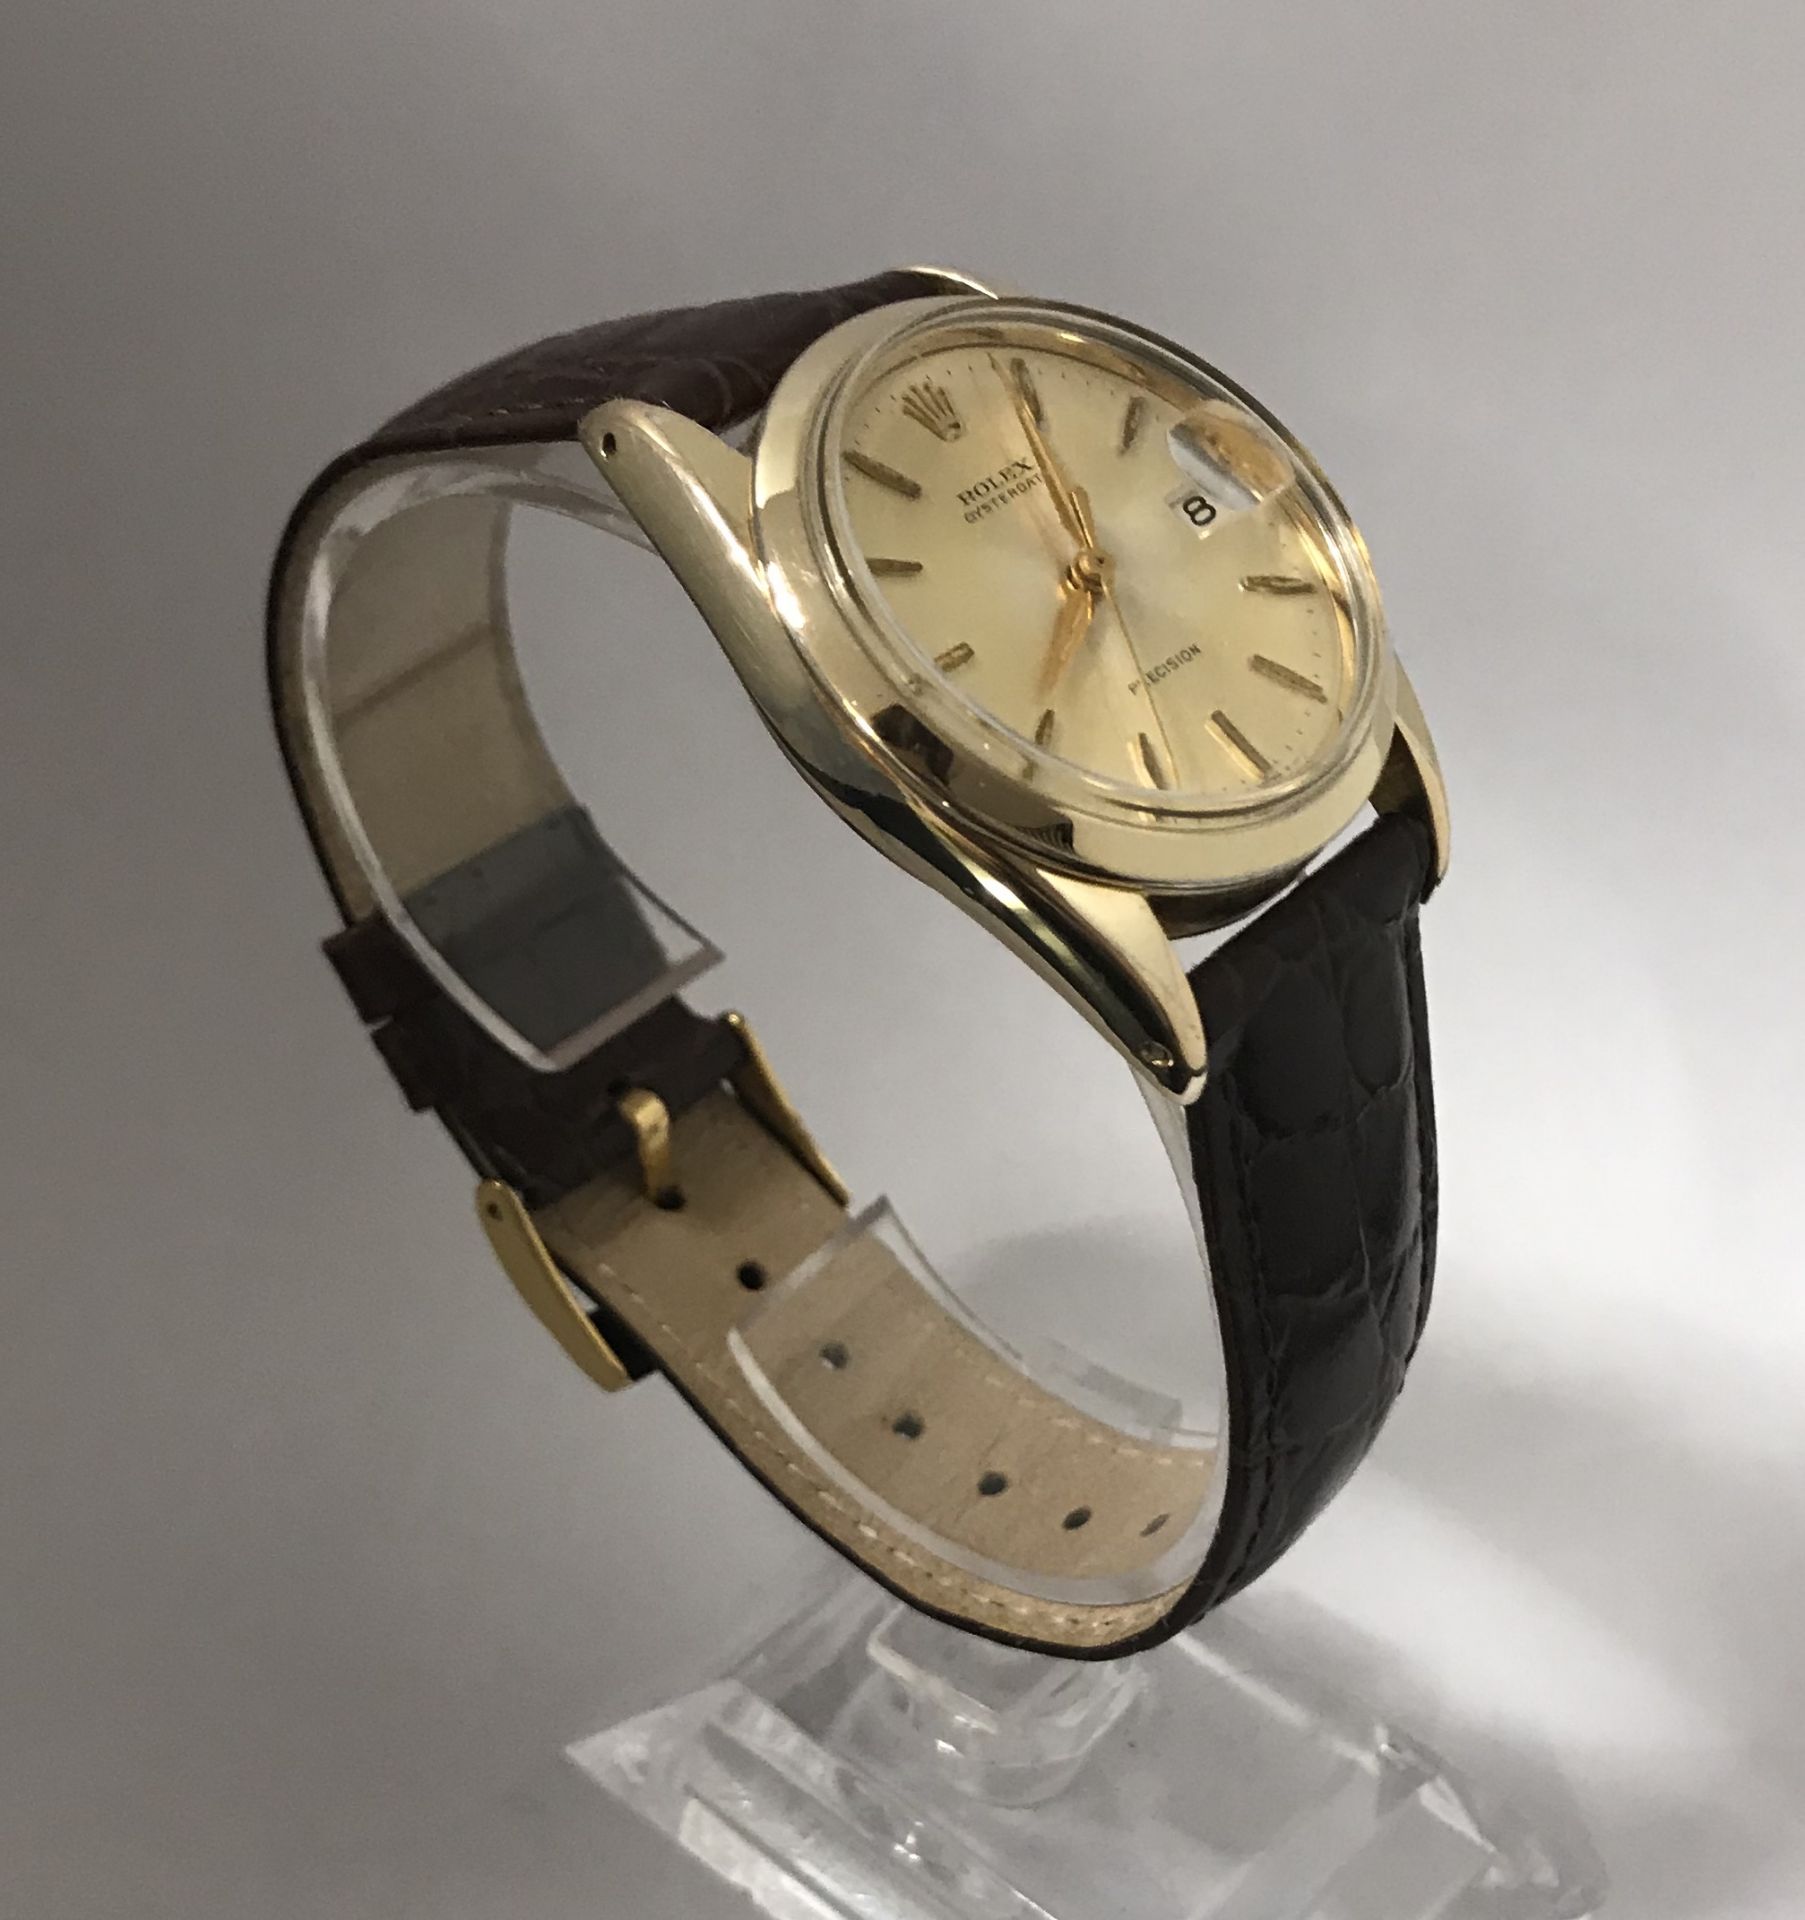 Gents Rolex 6694 Gold & Stainless Steel (1974) - Image 3 of 10